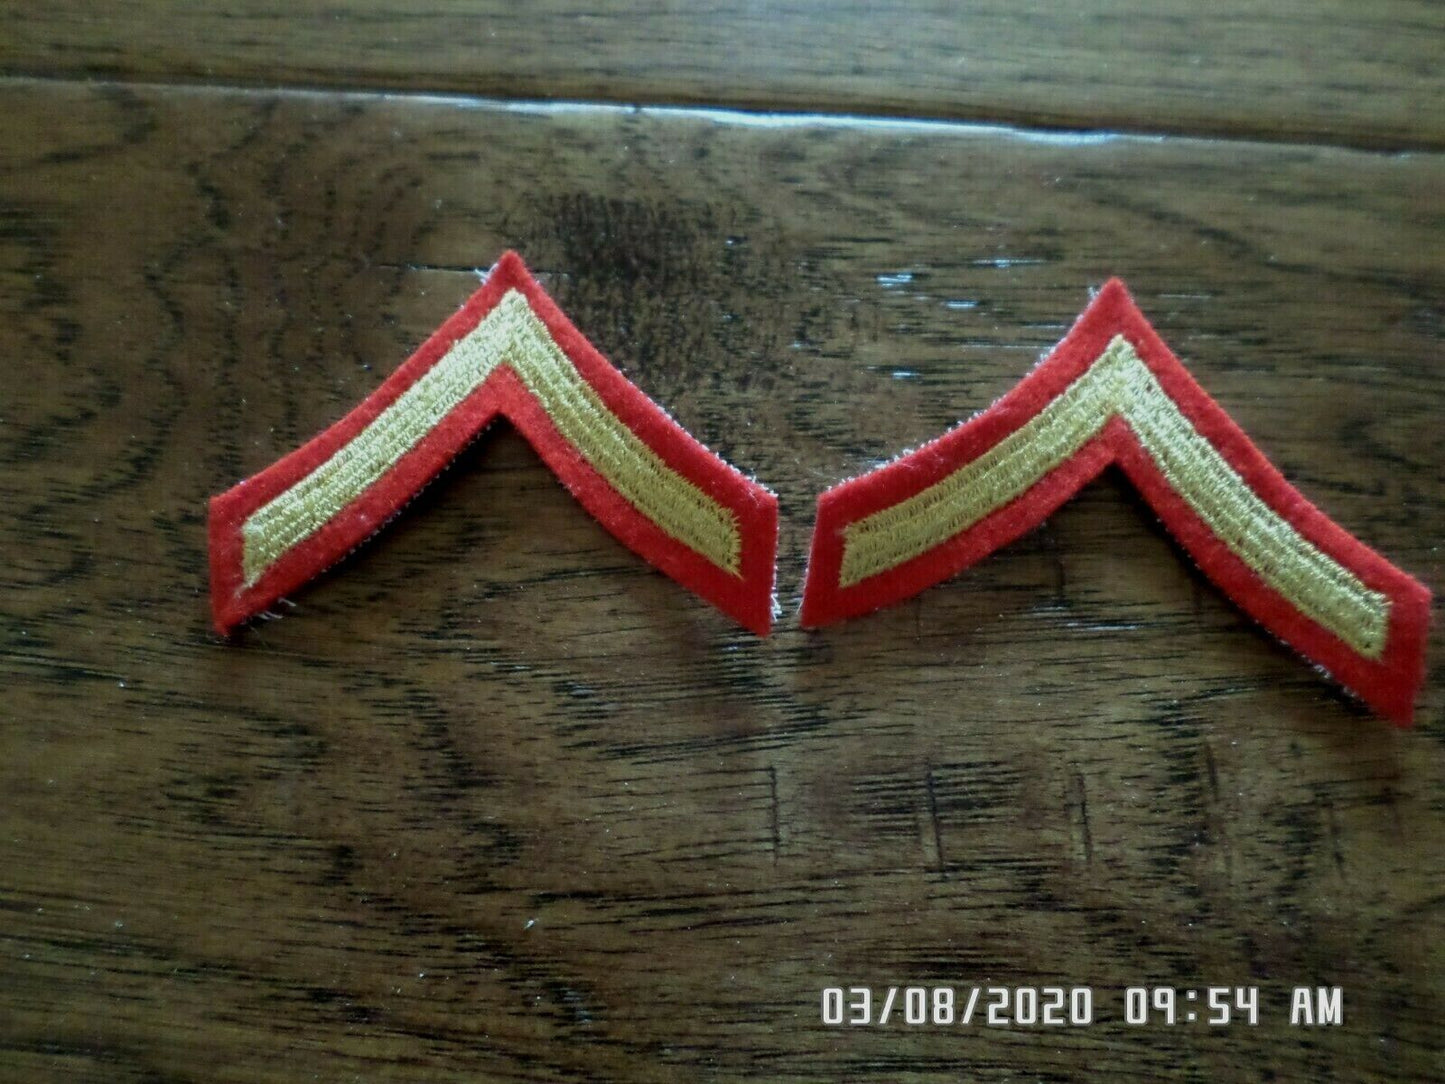 MARINE CORPS PRIVATE FIRST CLASS PATCHES FEMALE DRESS BLUES UNIFORM CHEVRON